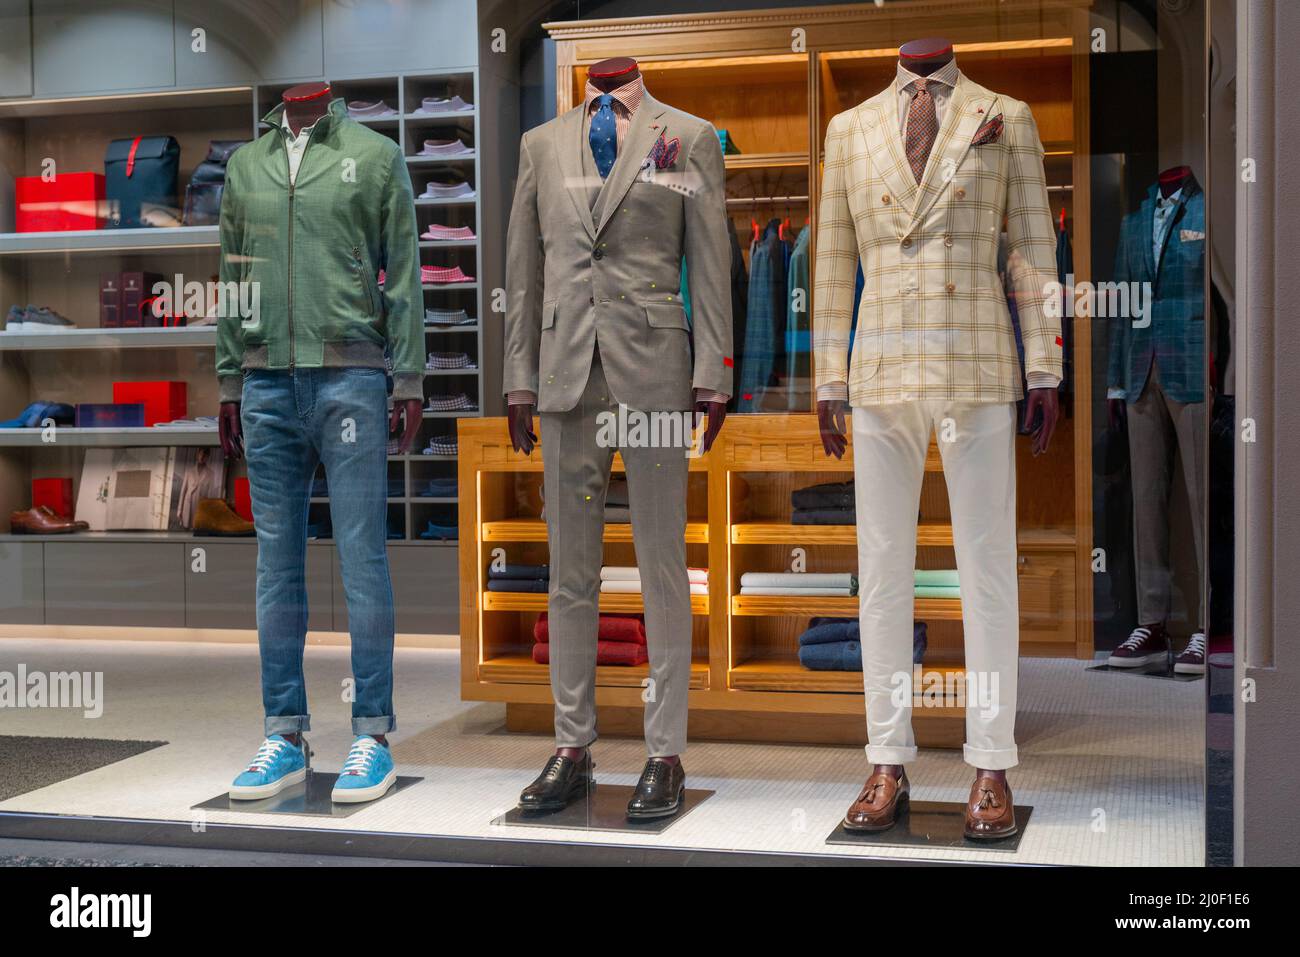 Male dummy in a shop window. Sale of men's clothing. Stock Photo